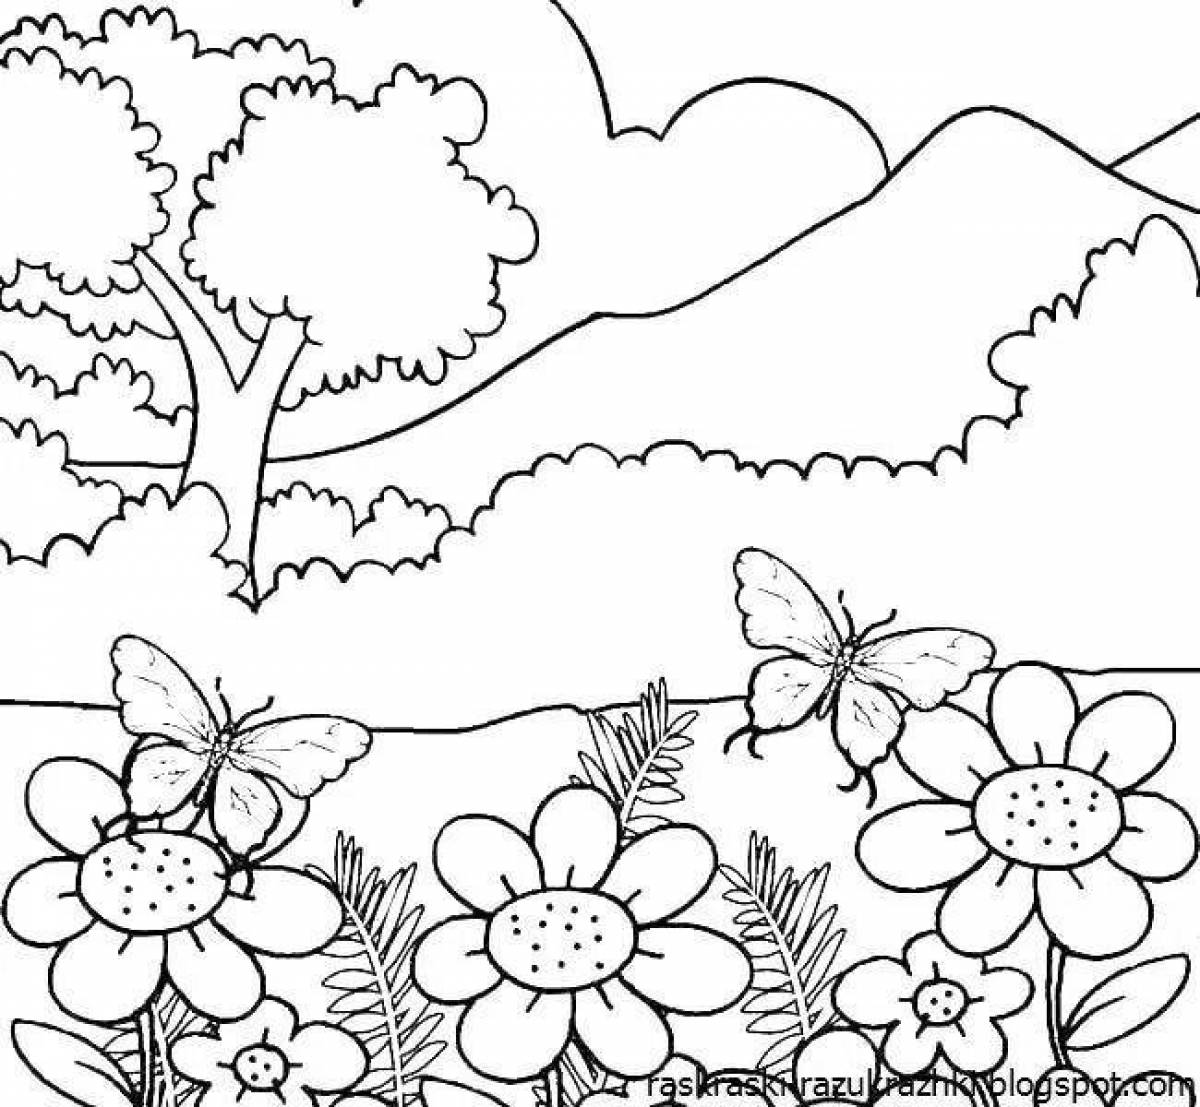 Coloring page wild nature